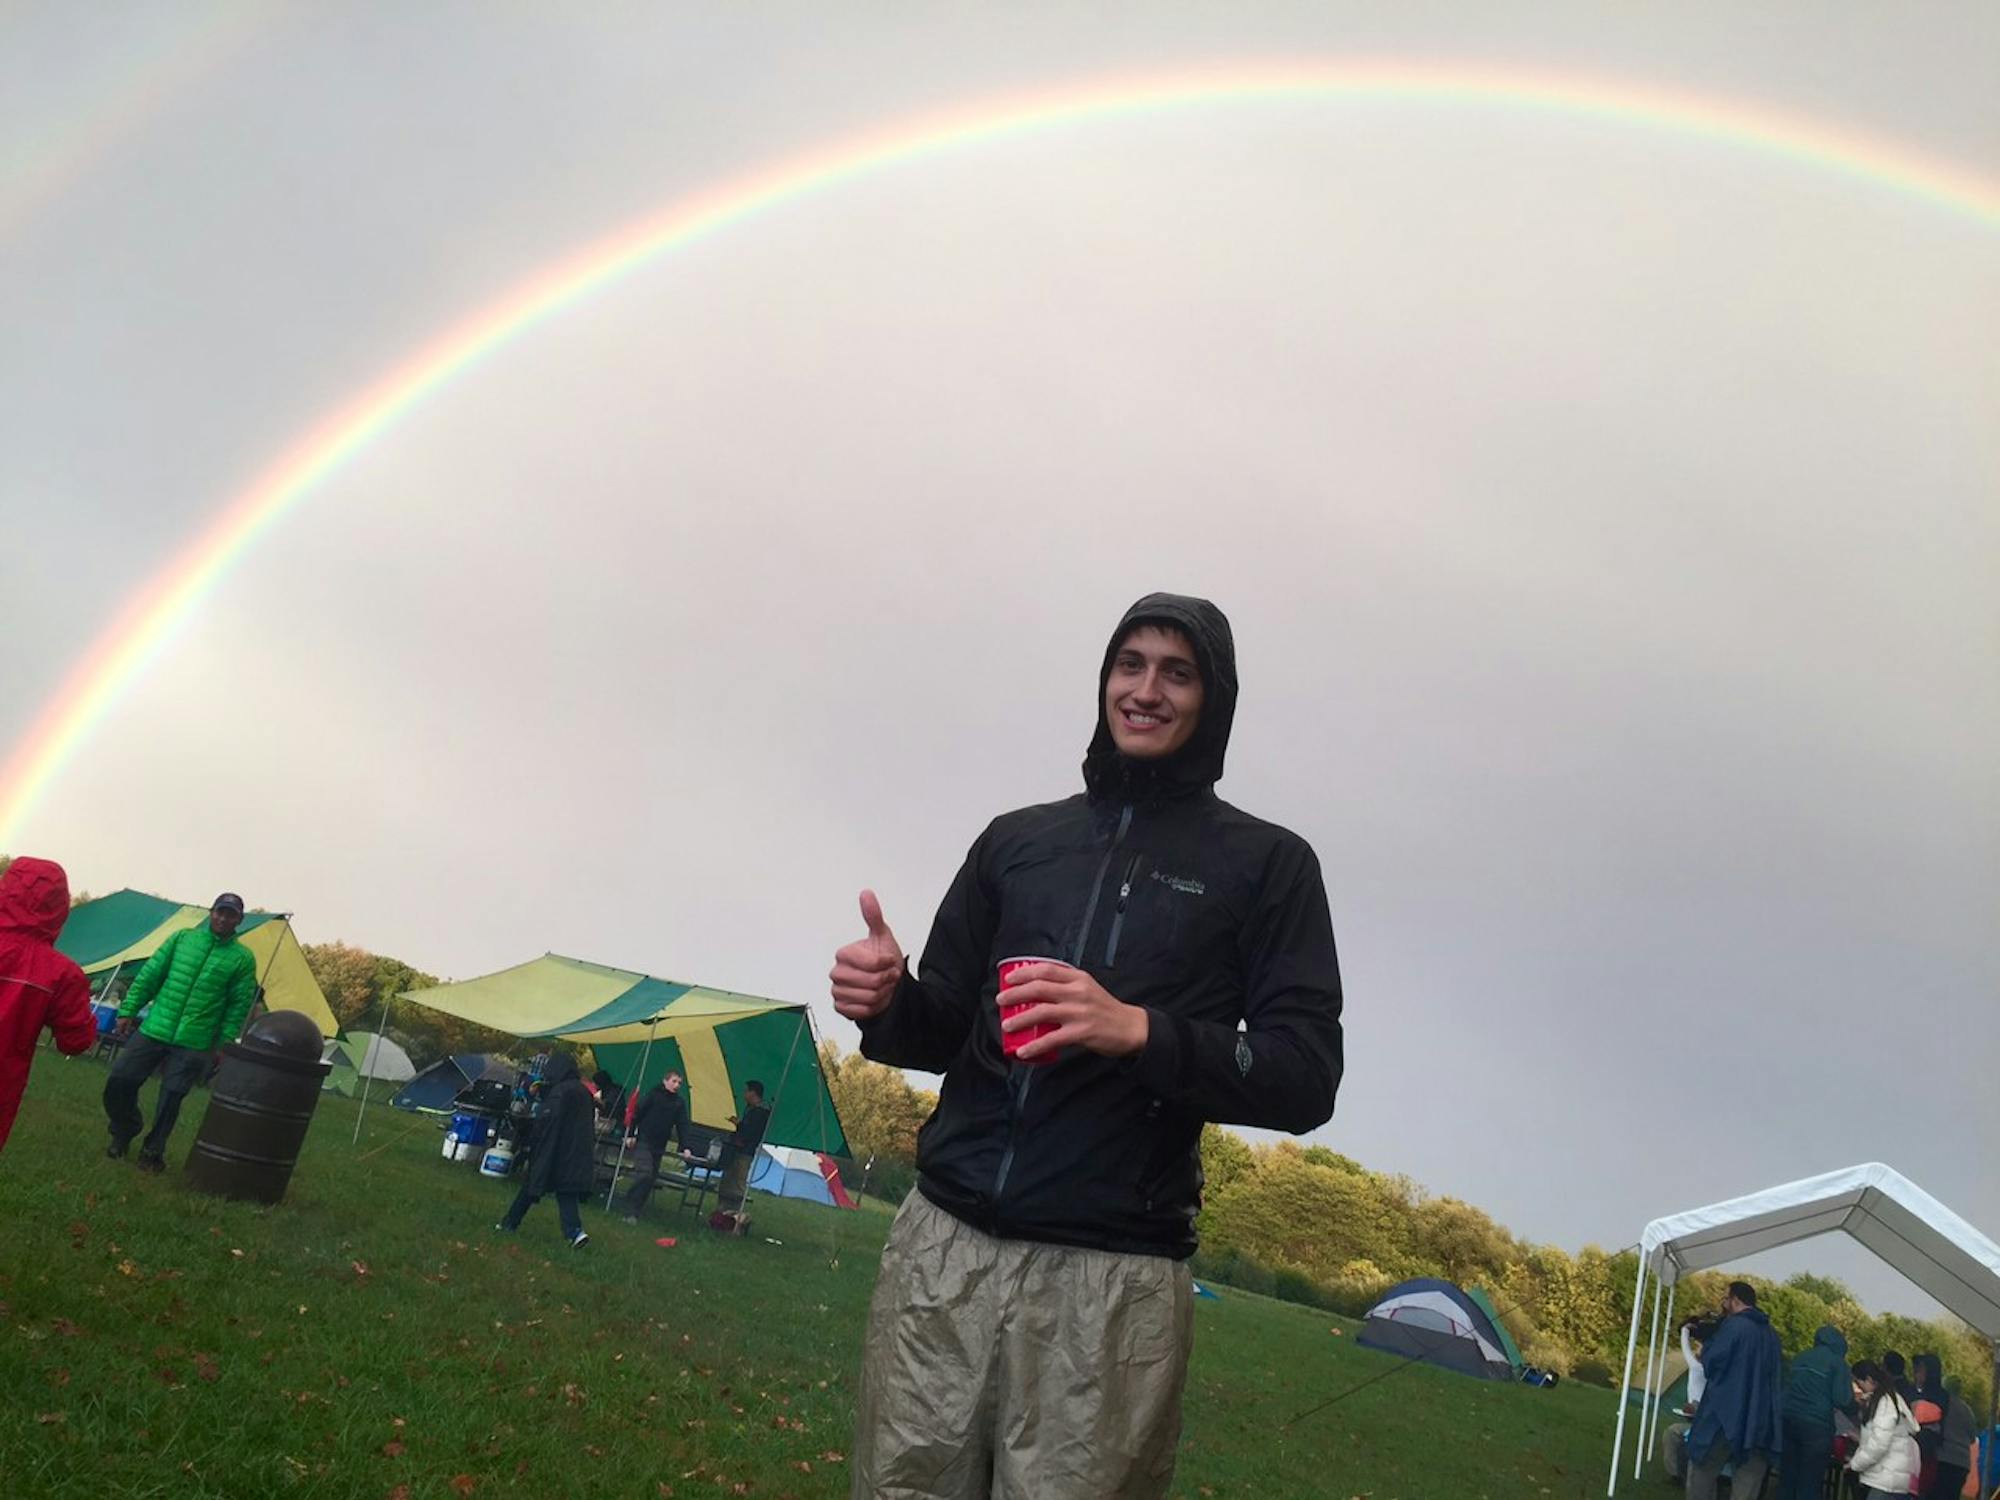 A young man stands outside in a rain jacket, offering a thumbs up. Behind him a full rainbow spans the sky.